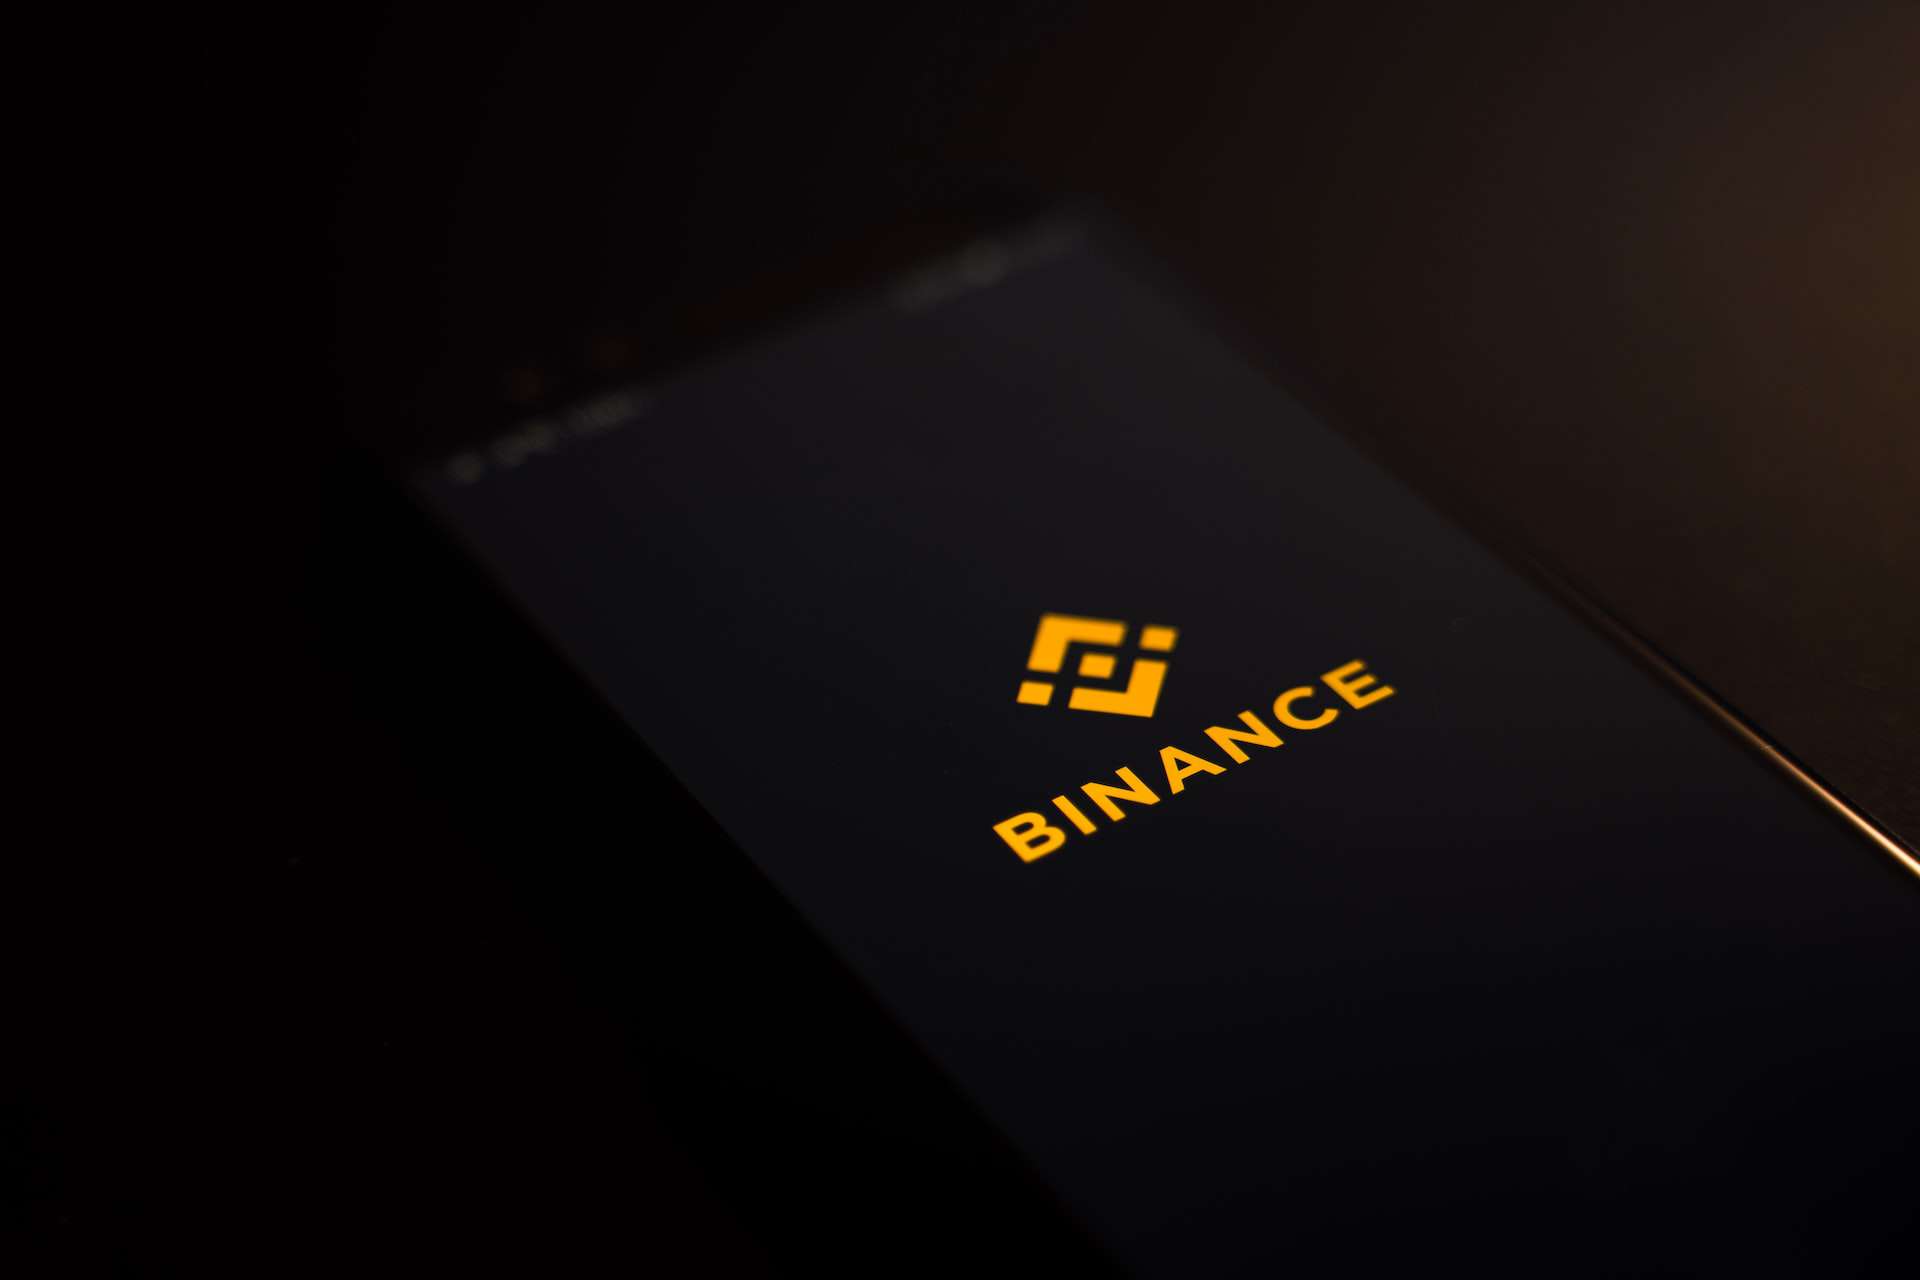 Binance Claims "Undisclosed Wallet" is a TRX Cold Wallet Amidst Rumours